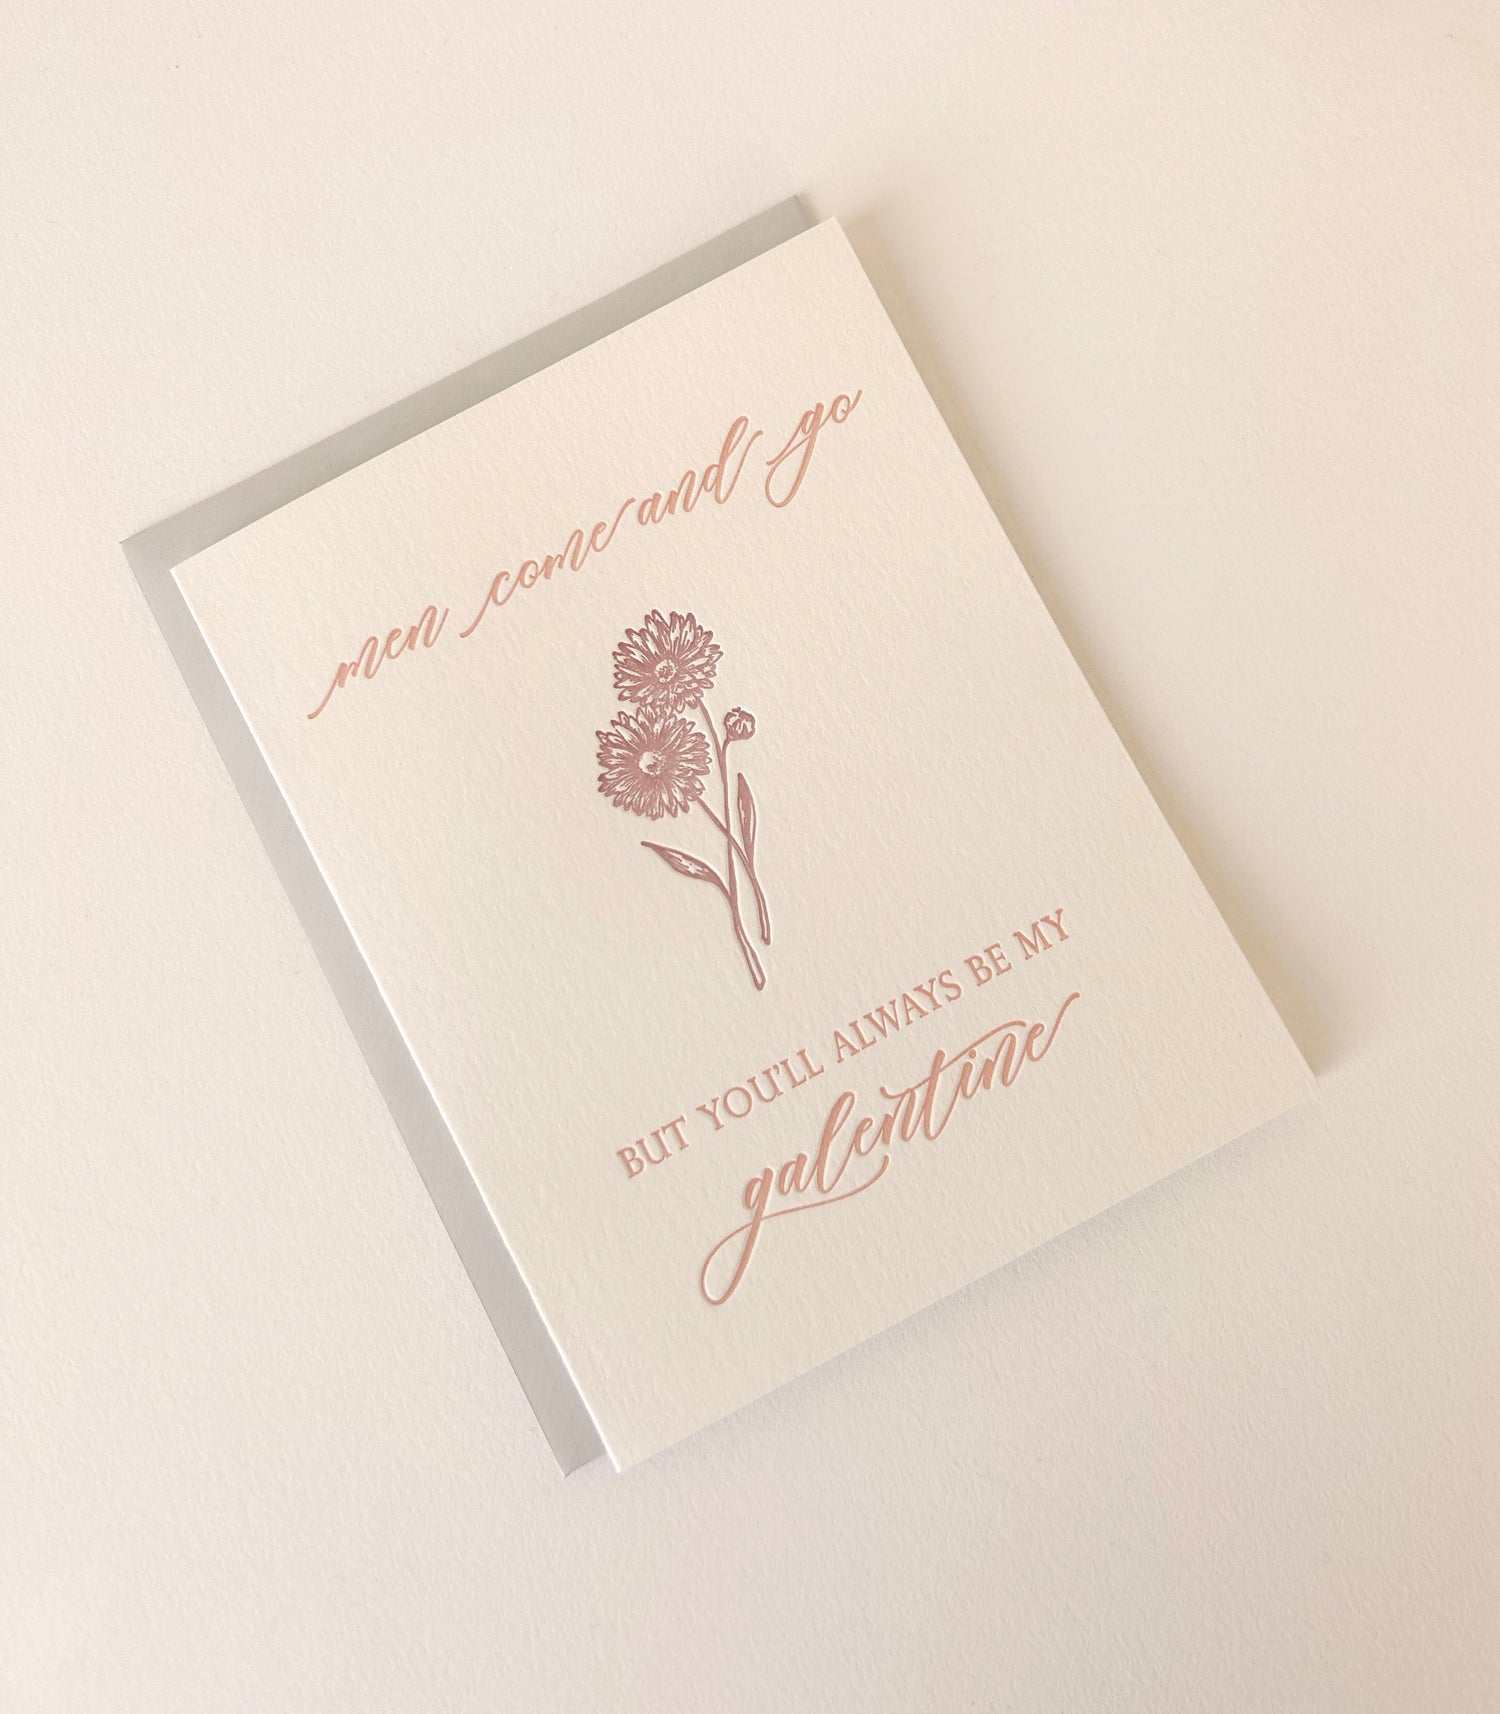 Letterpress love card with a flower that says "Men Come and Go But You'll Always Be My Galentine" by Rust Belt Love